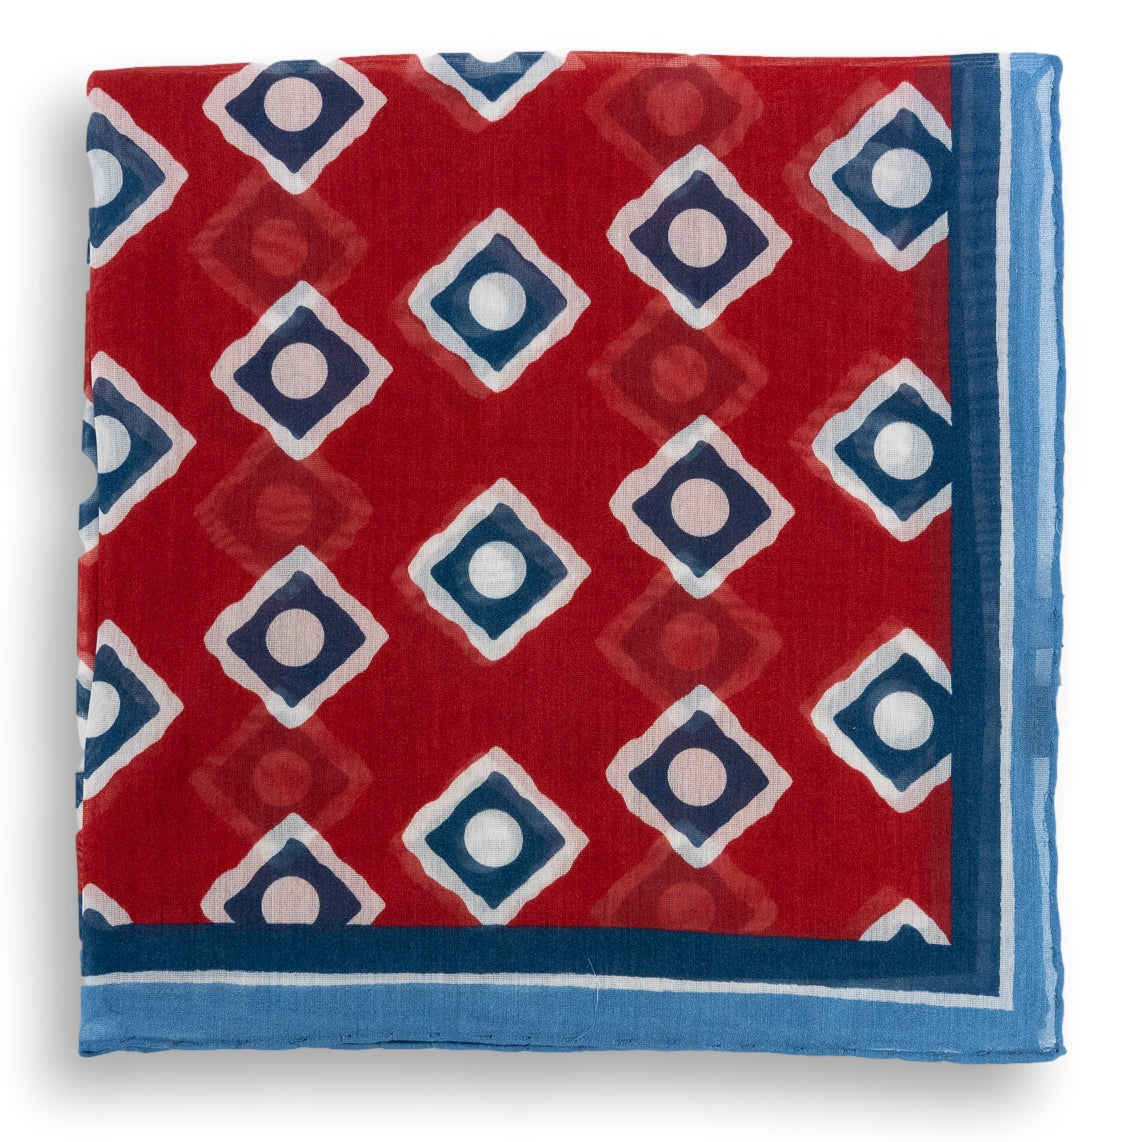 Bordered Square and Dot Cotton and Linen Pocket Square